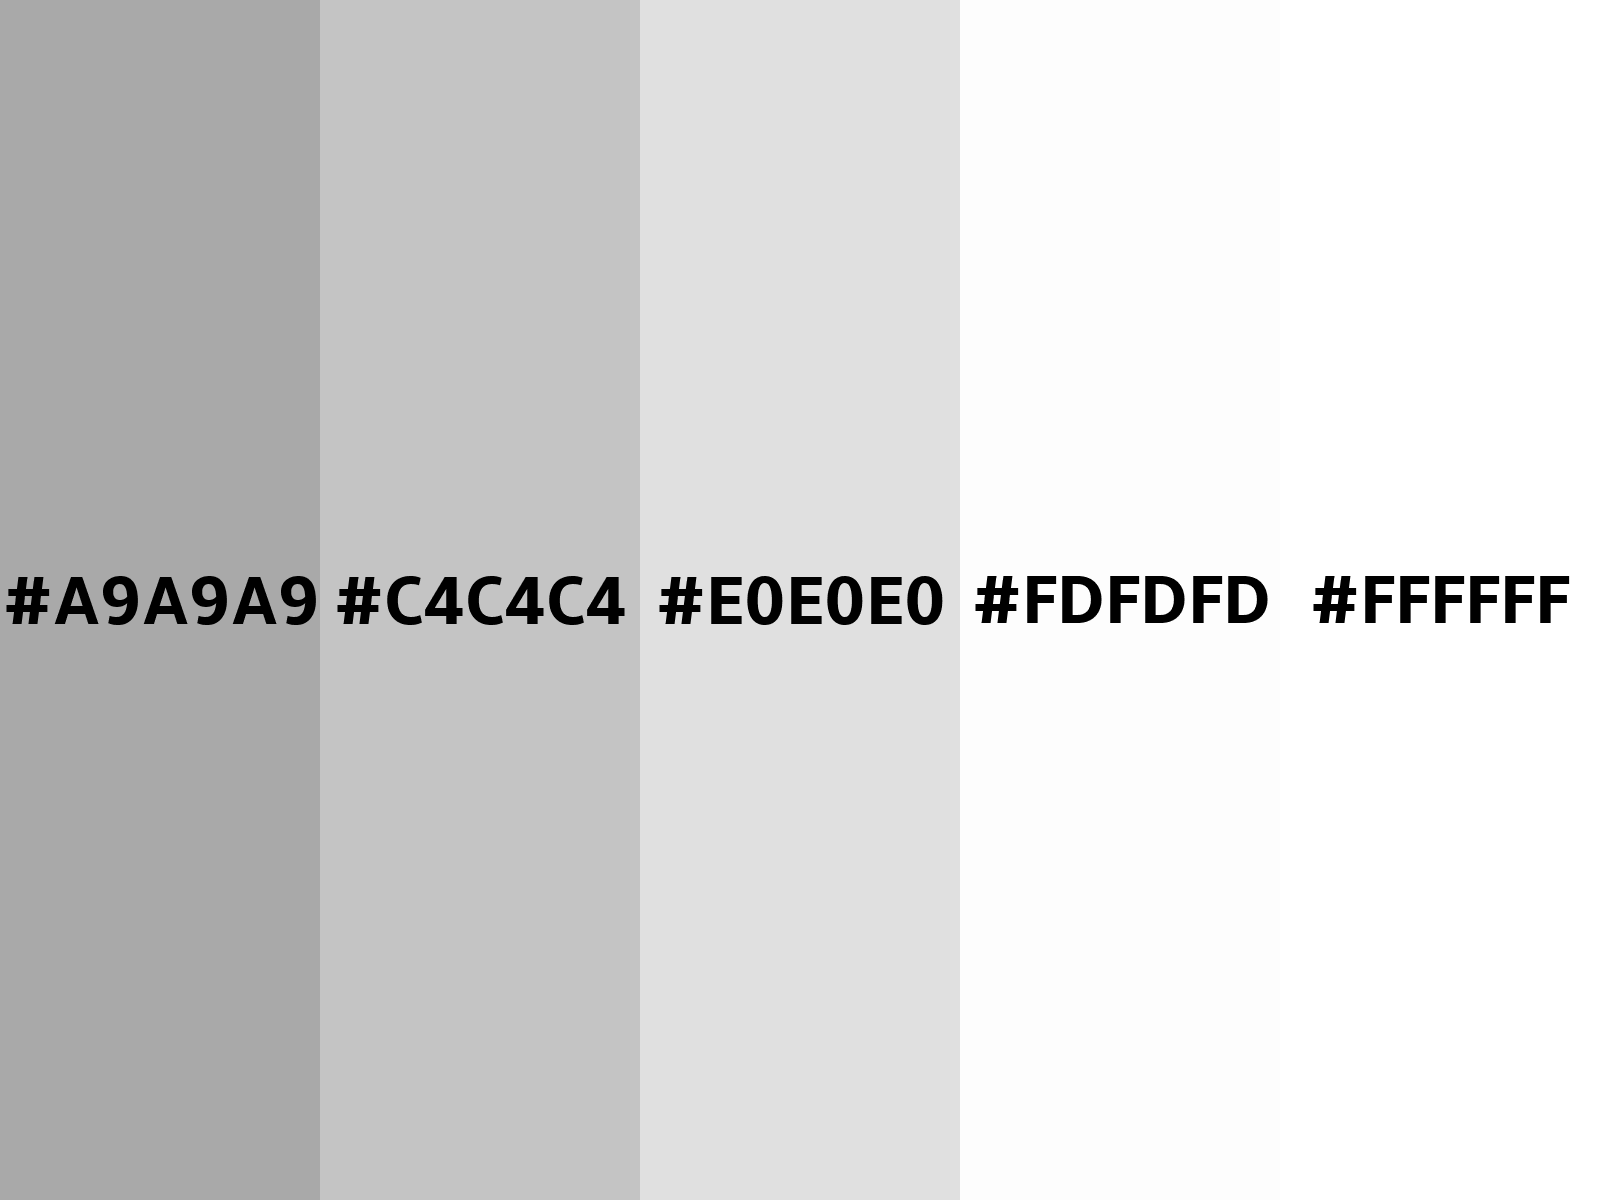 Muted Gray color hex code is #A9A9A9